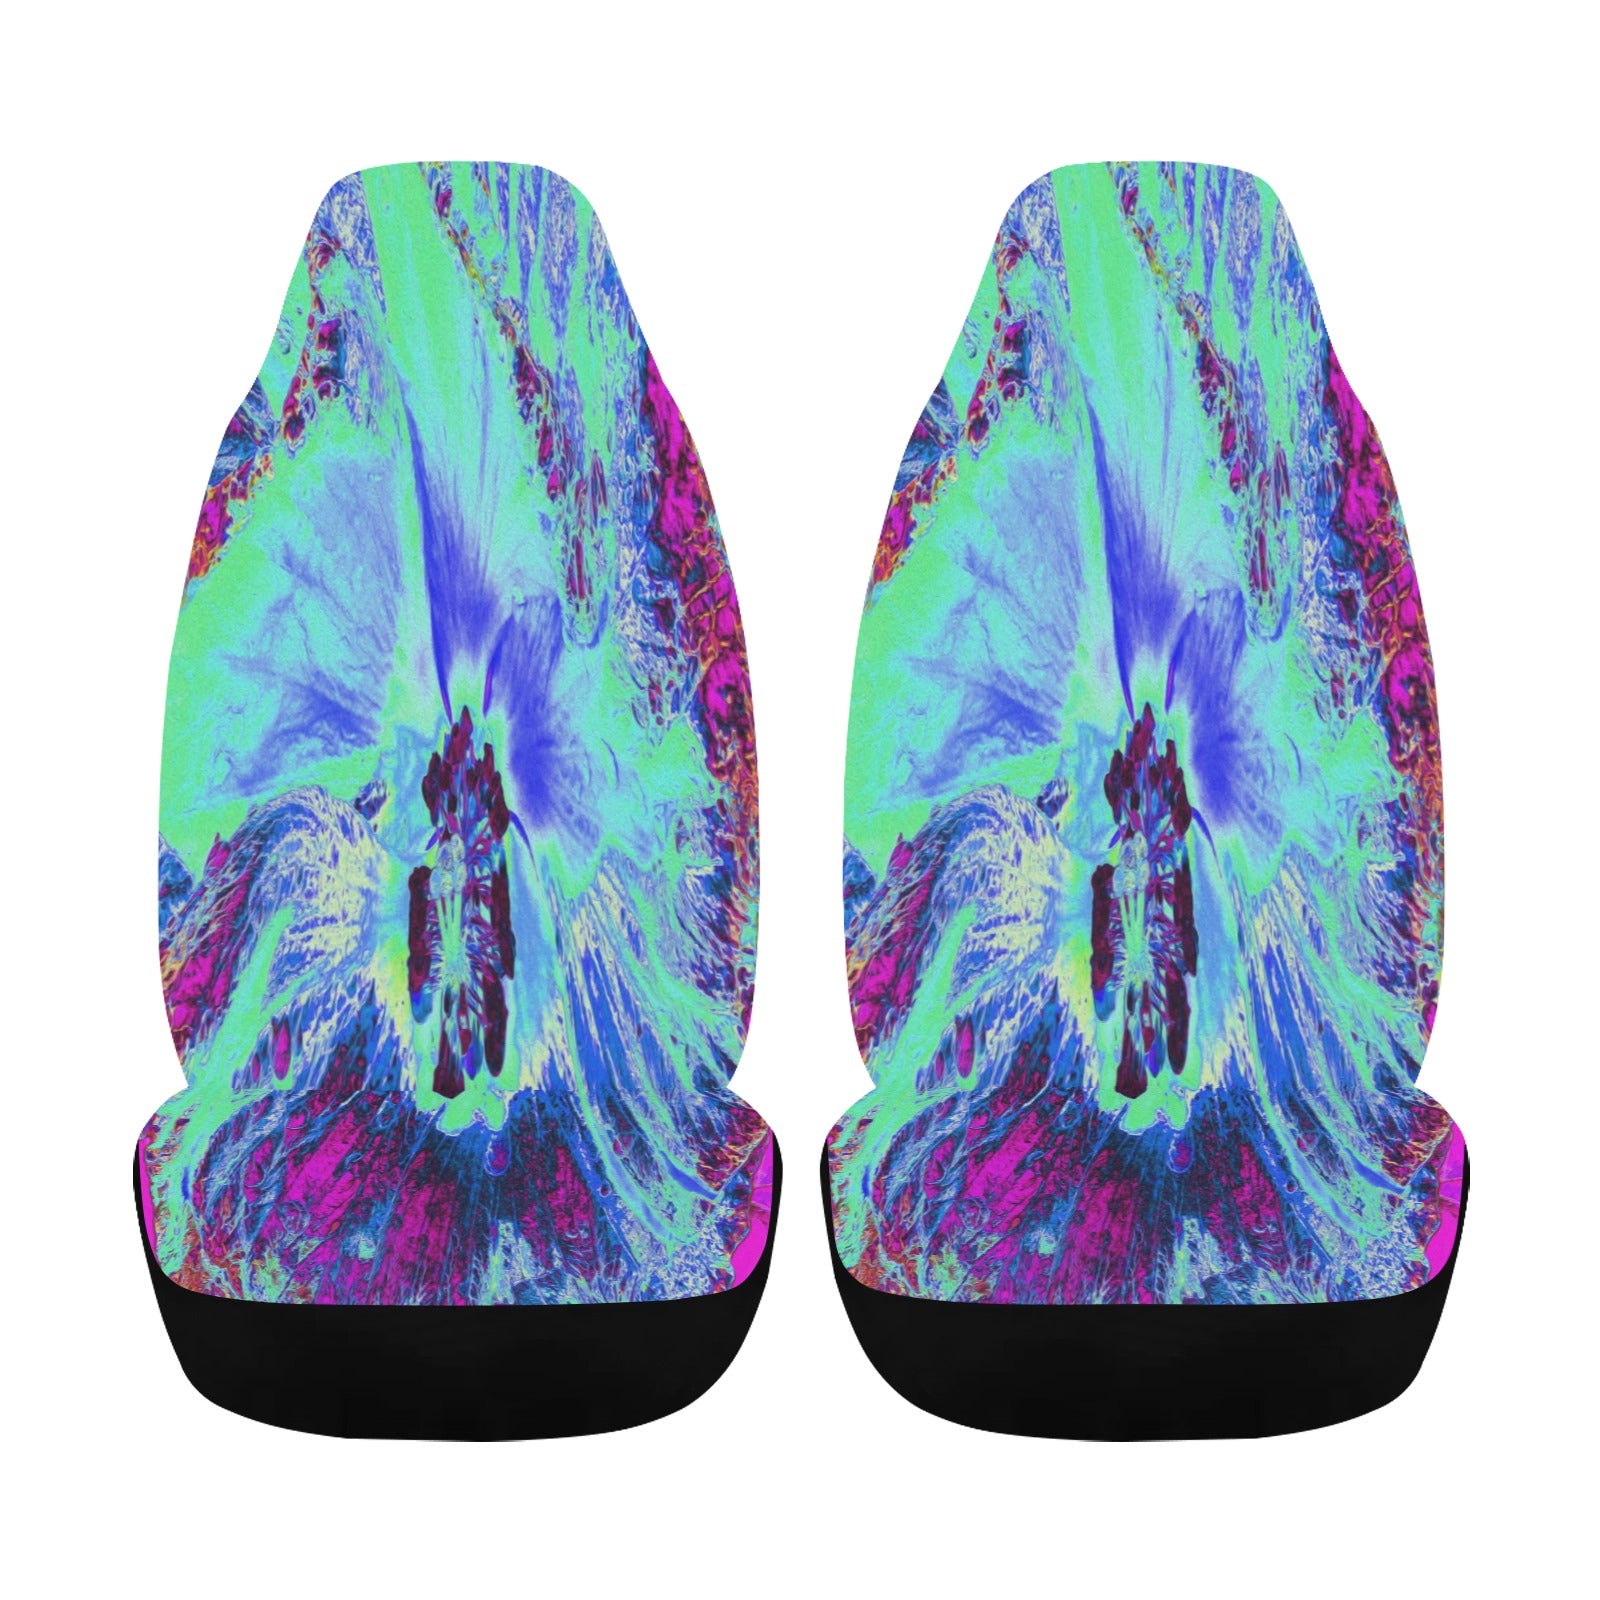 Car Seat Covers, Psychedelic Retro Green and Blue Hibiscus Flower